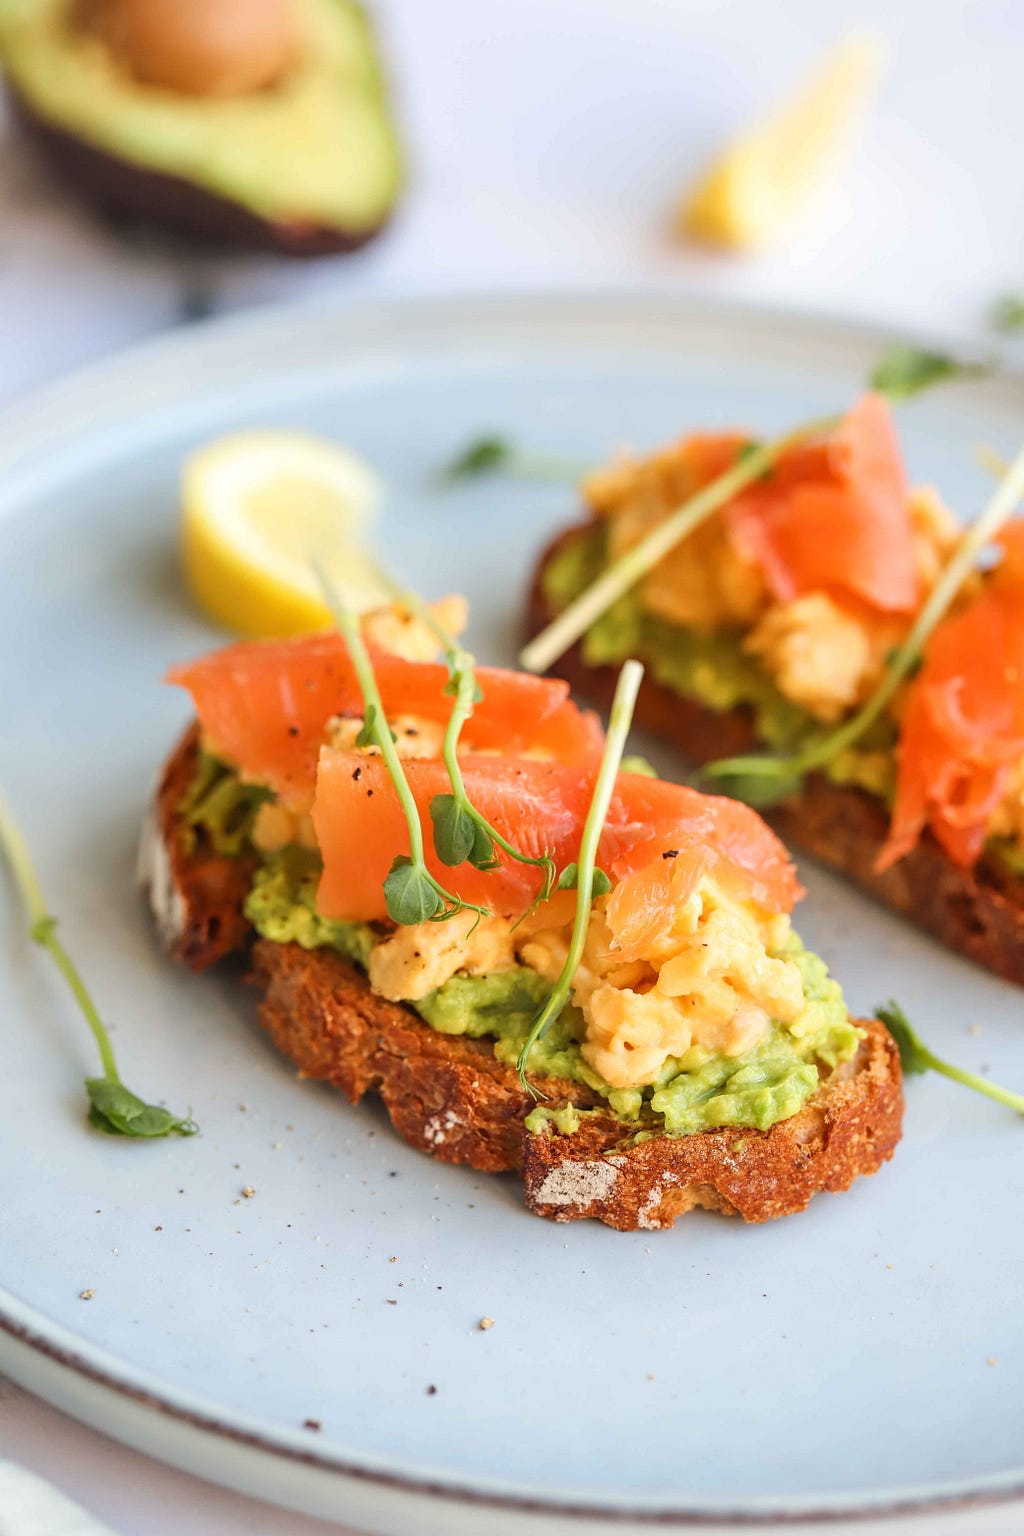 Avocado toast with scrambled eggs and smoked salmon, garnished with bean sprouts. Photo by FIT & NU.